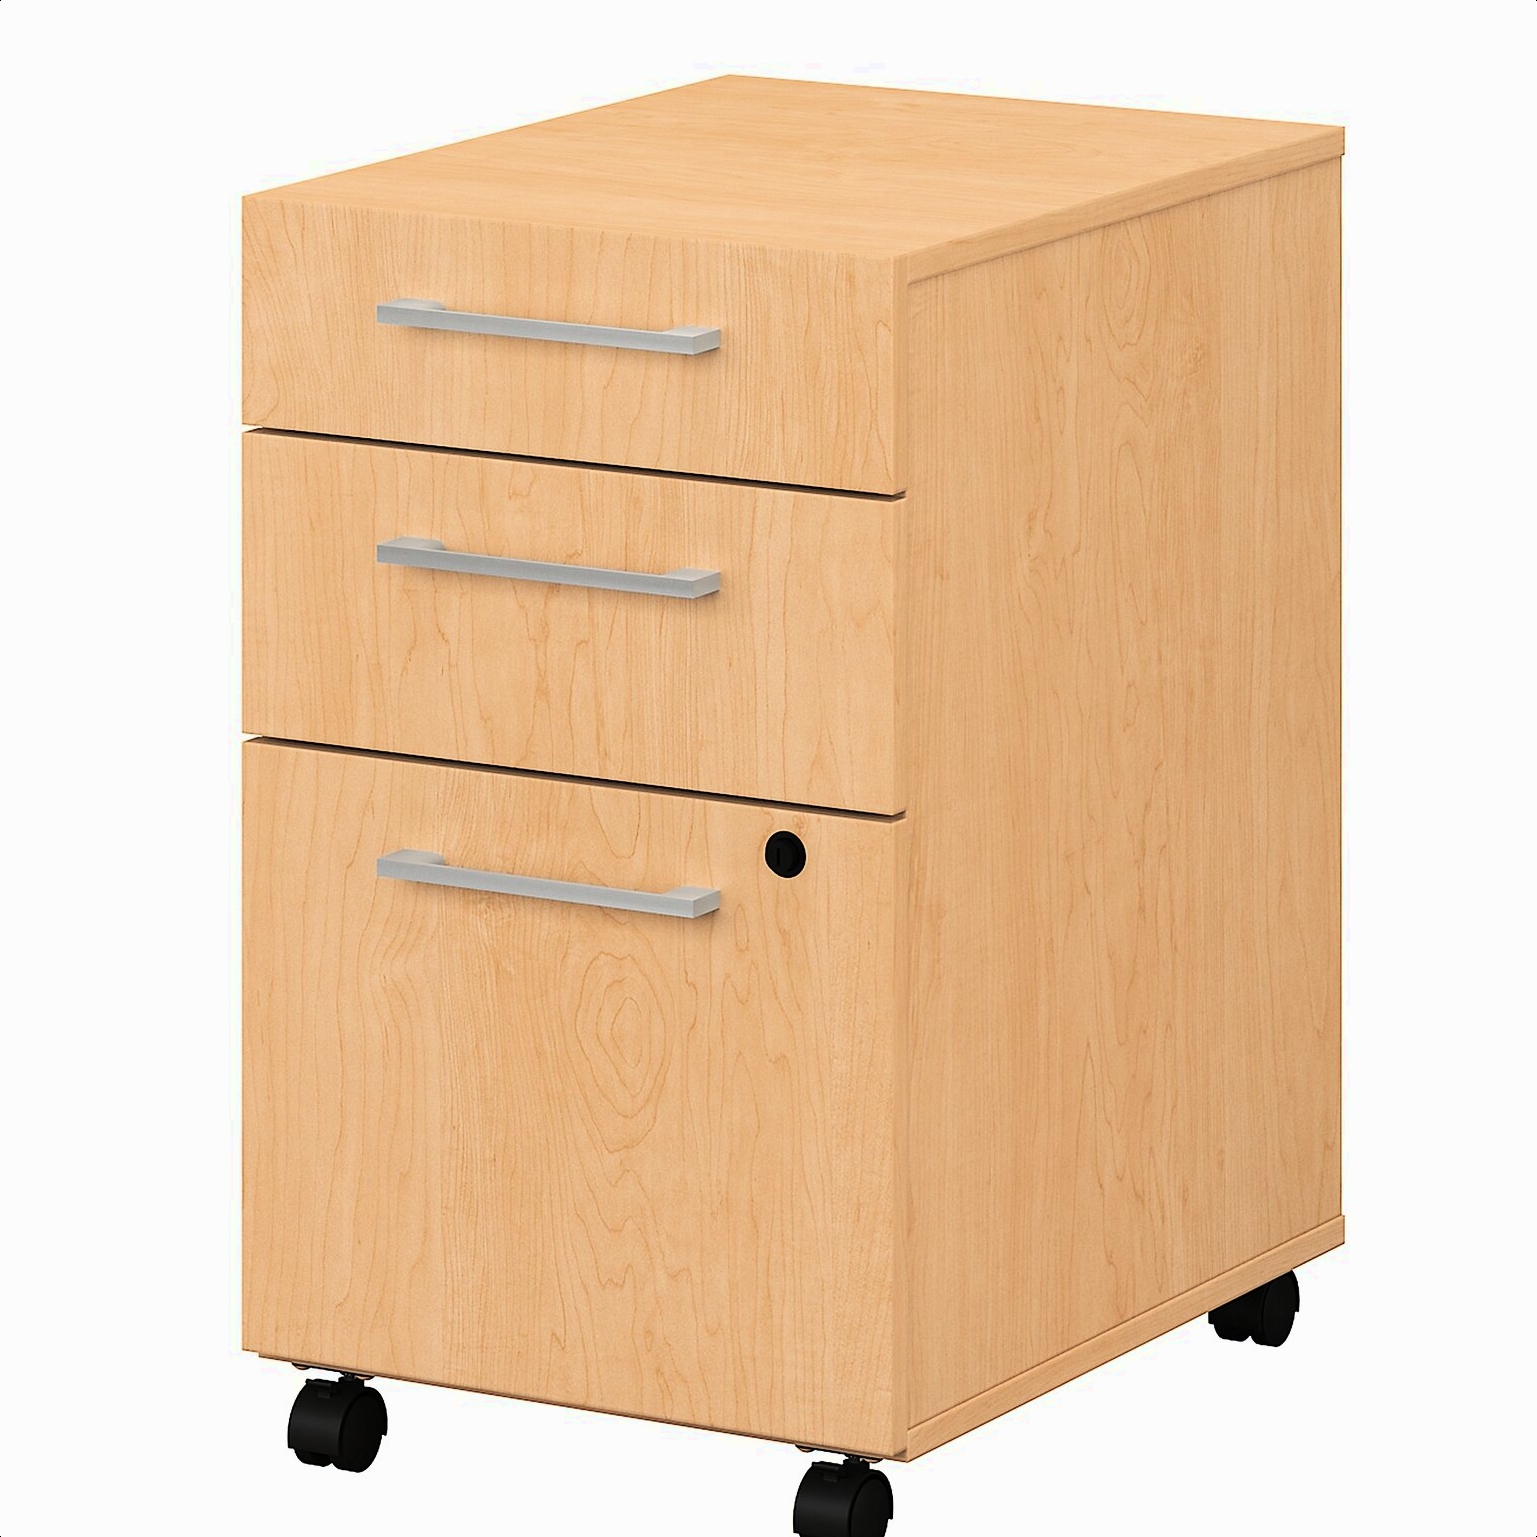 Milanhome 400 Series 3-Drawer Mobile Vertical Filing Cabinet - image 1 of 5